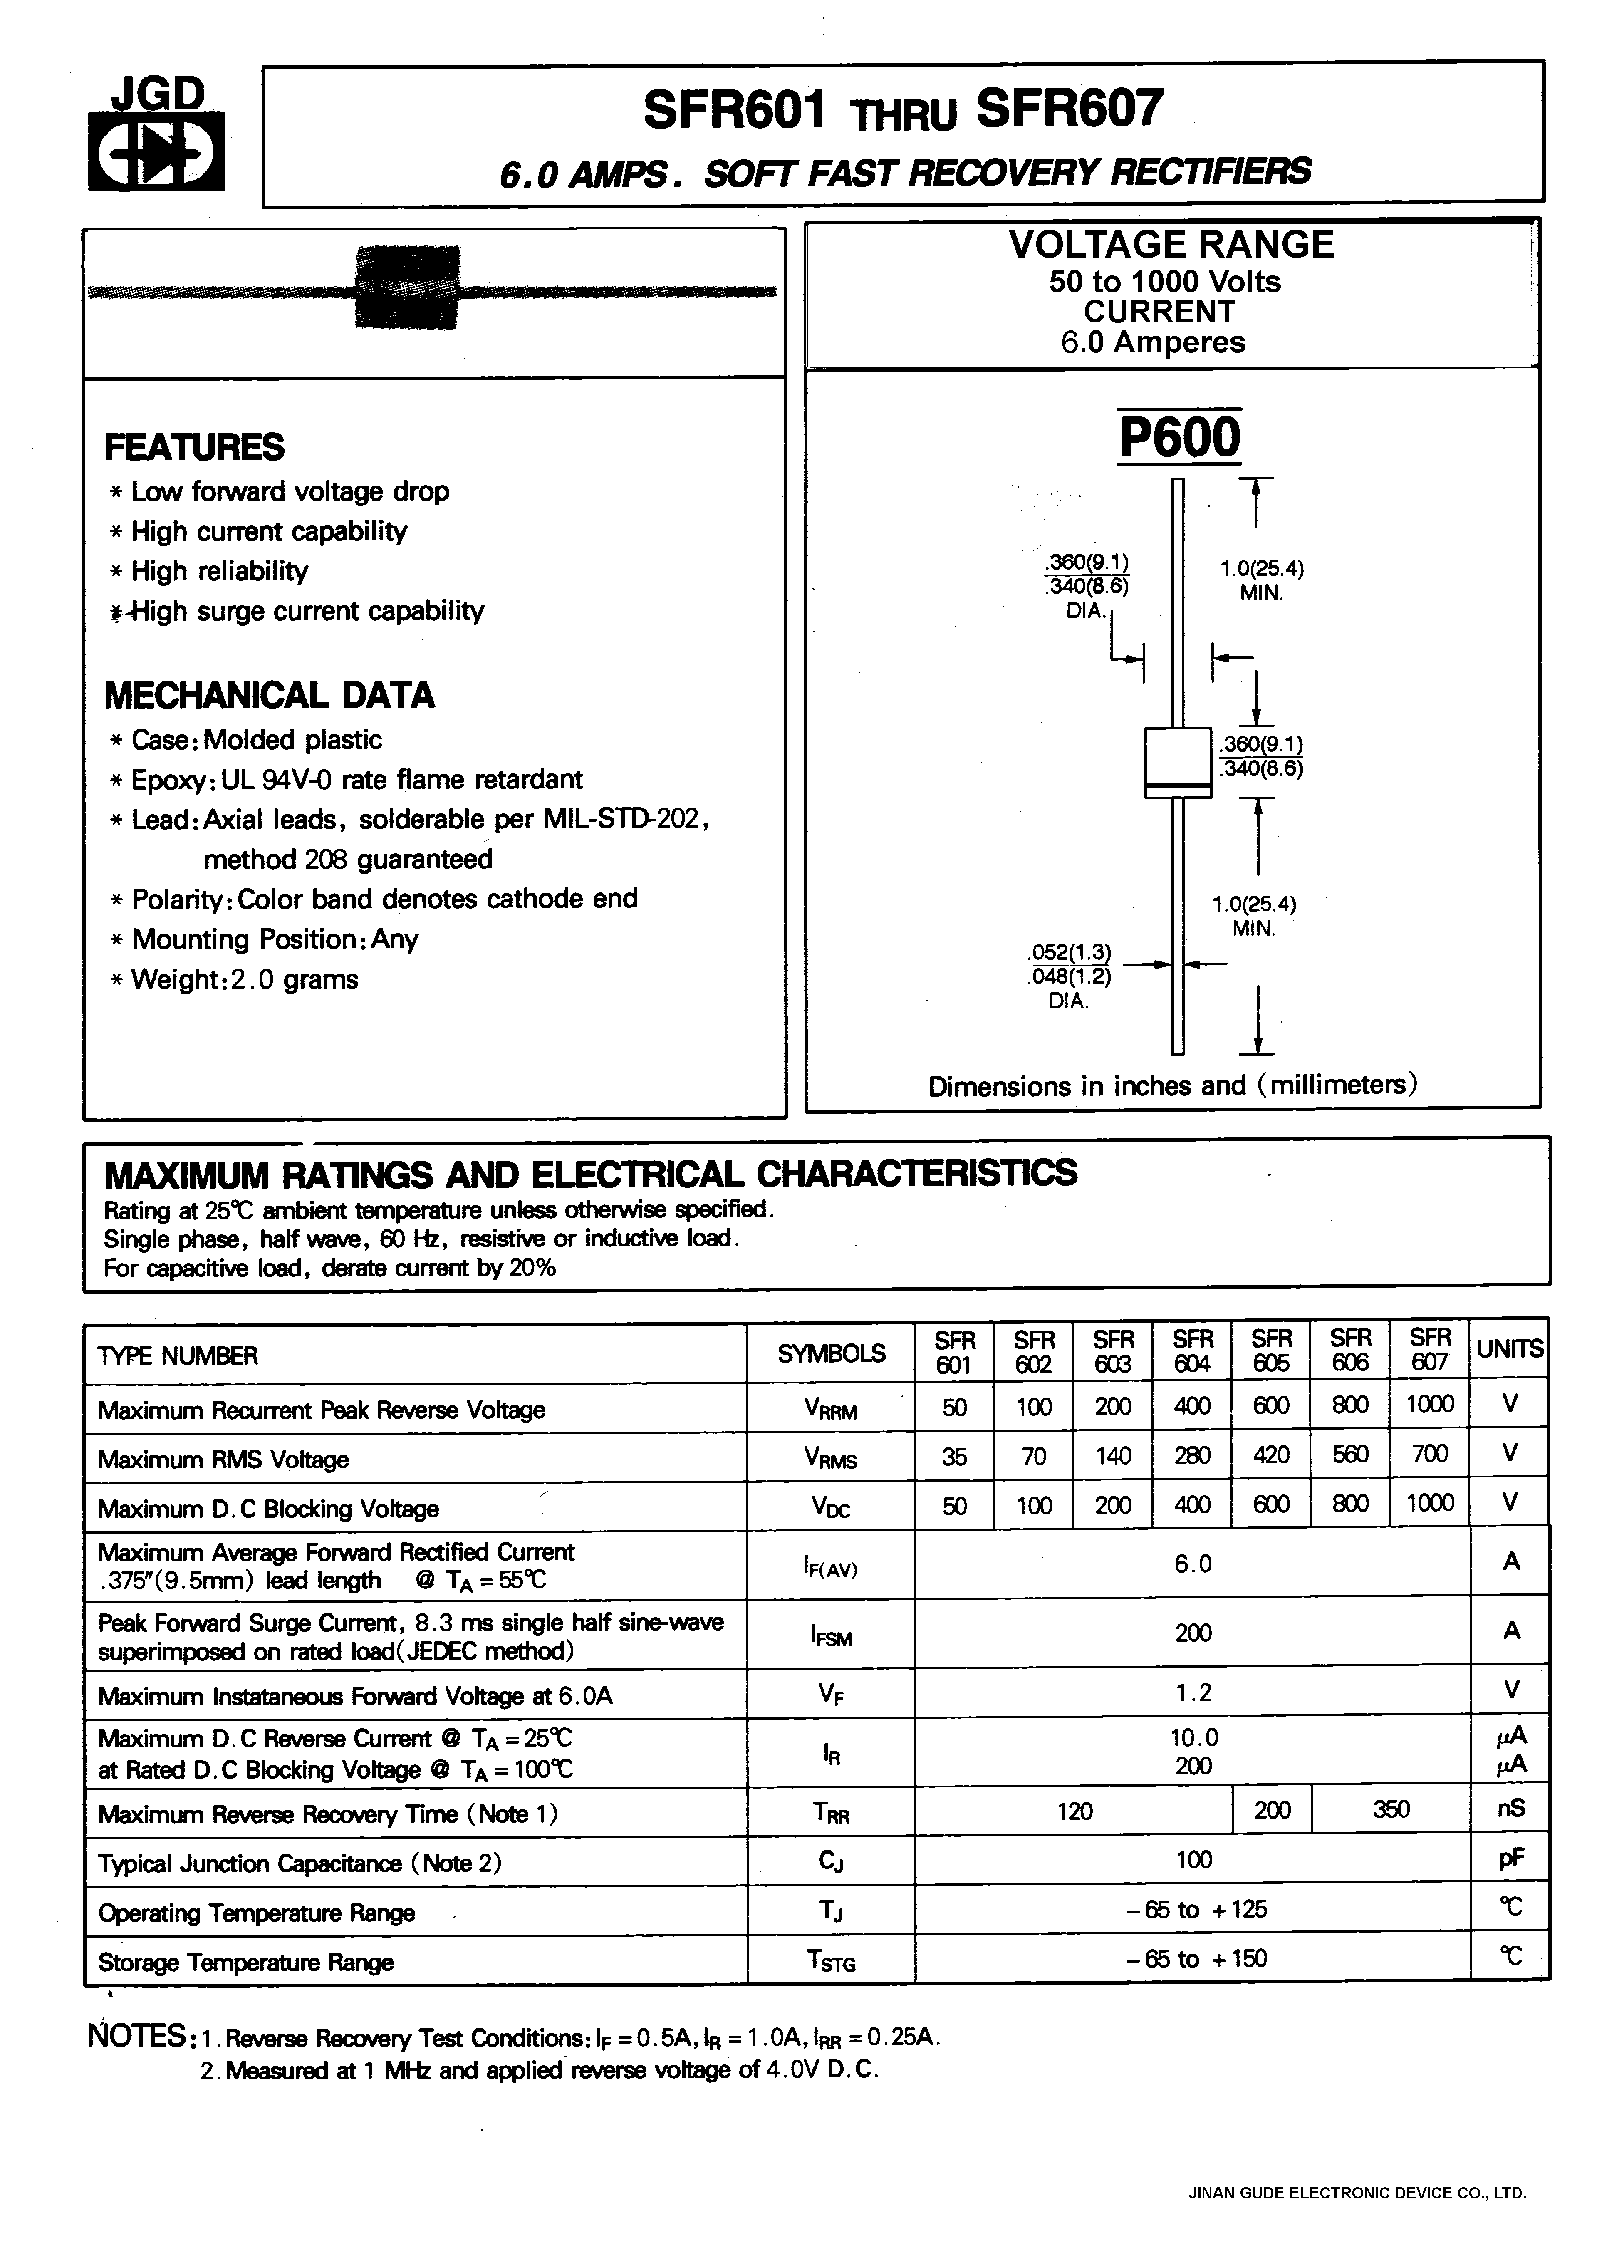 Datasheet SFR605 - 6.0 AMPS. SOFT FAST RECOVERY RECTIFIERS page 1